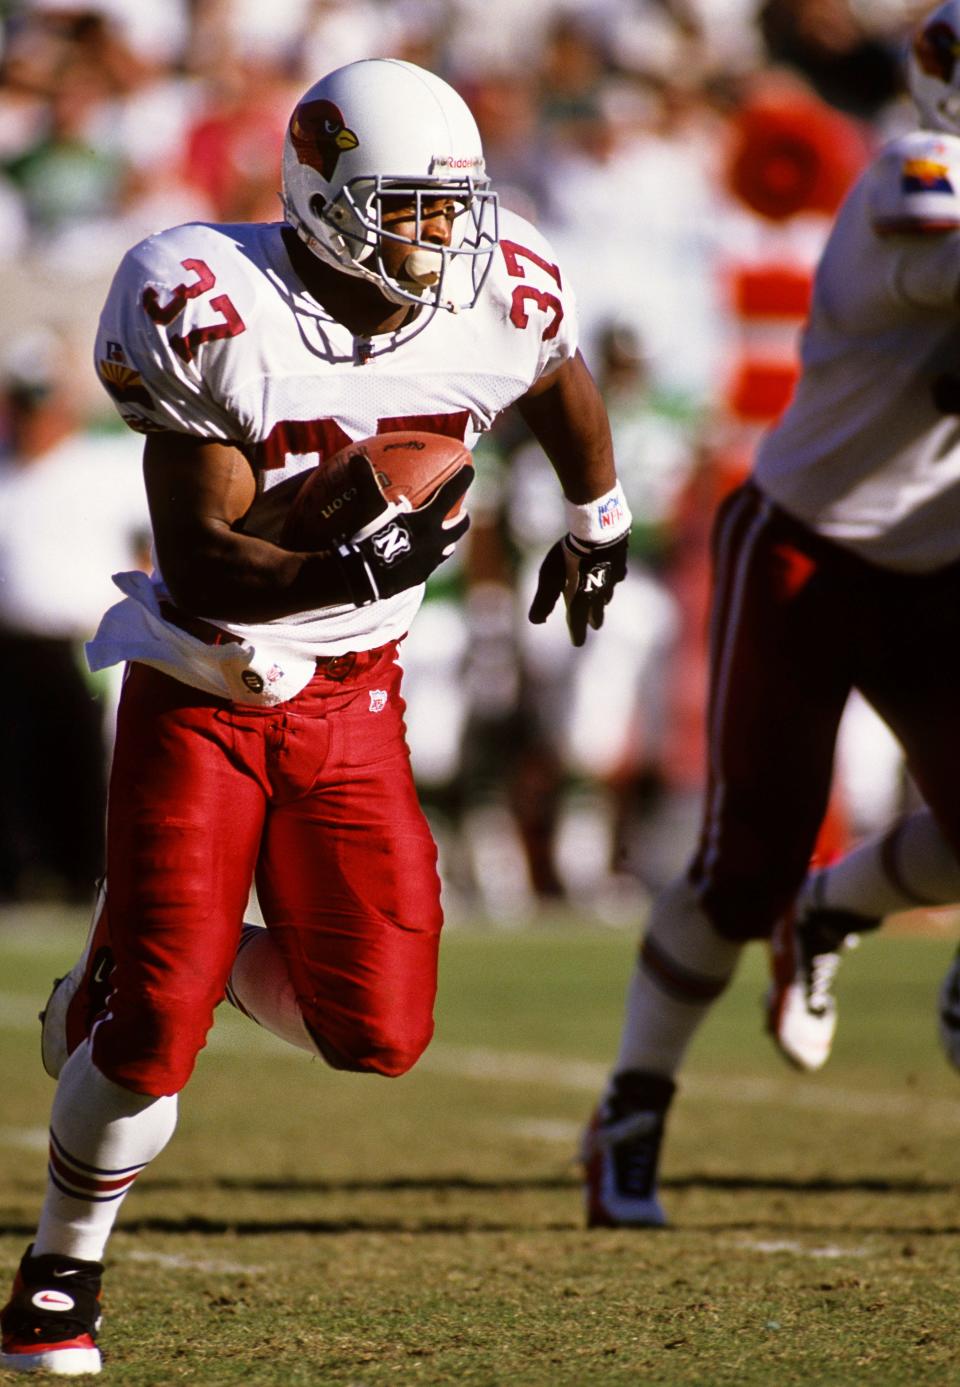 Arizona Cardinals running back Larry Centers (37) in action against the New York Jets at Sun Devil Stadium on Oct. 27, 1996.